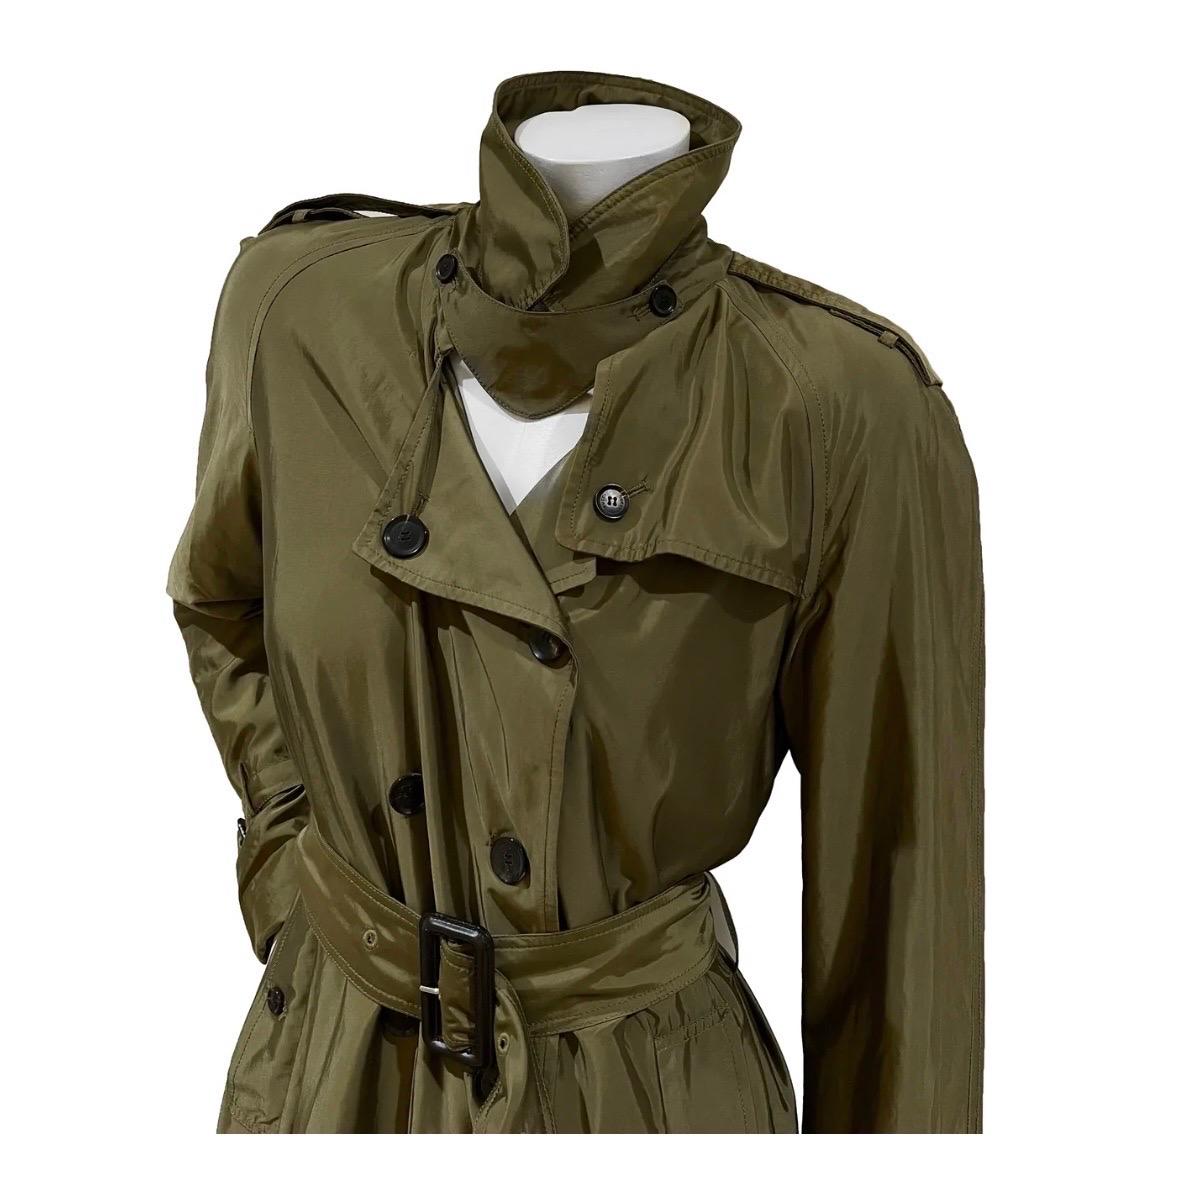 Green Nylon Trench Coat by Gucci
Resort 2011 Collection
Made in Italy
Green
Coat has adjustable belt with leather buckle detail
Trench coat style 
Button down and belt closure
Long sleeve
Neckline has removable fabric detail with button closure
Top